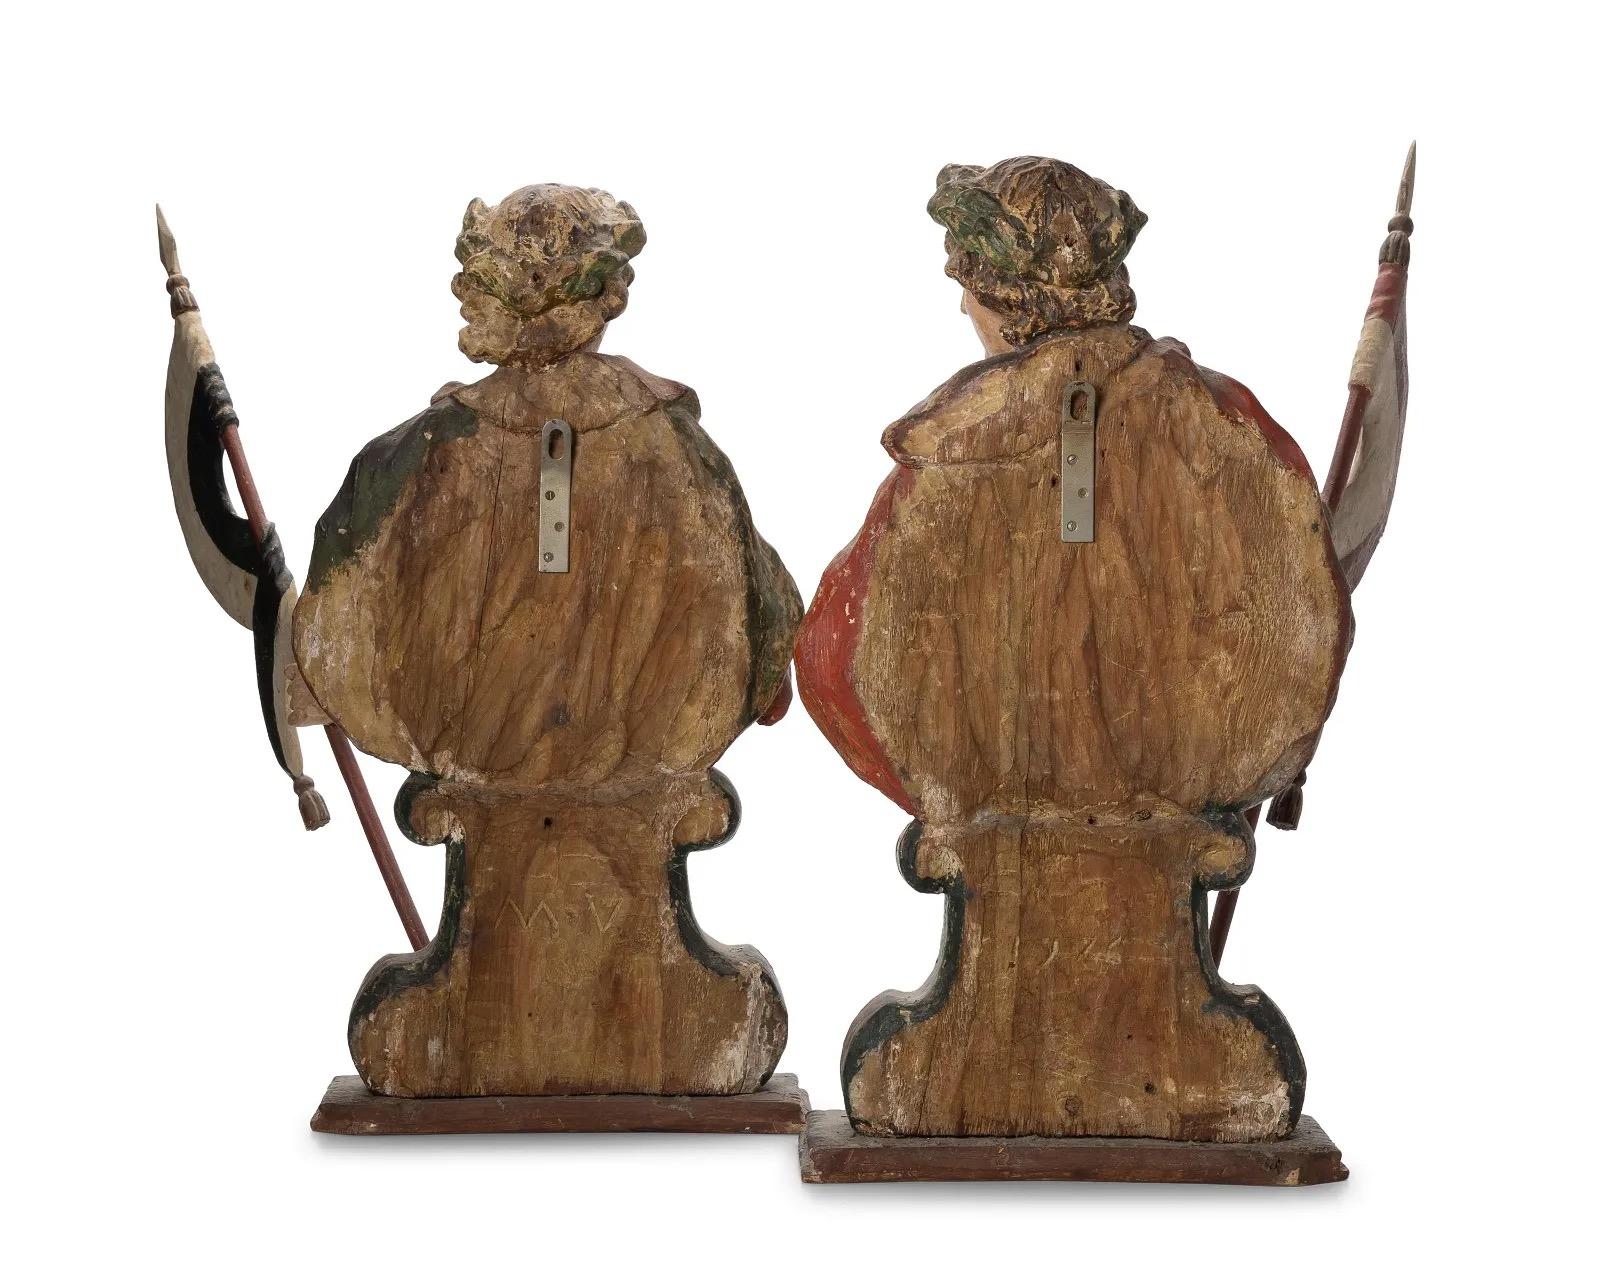 Behold a captivating pair of 18th-century hand-carved wooden treasures, dating from the remarkable span of 1717 to 1780. These exquisite pieces stand as a testament to the artistic mastery of their era, adorned with original polychrome and